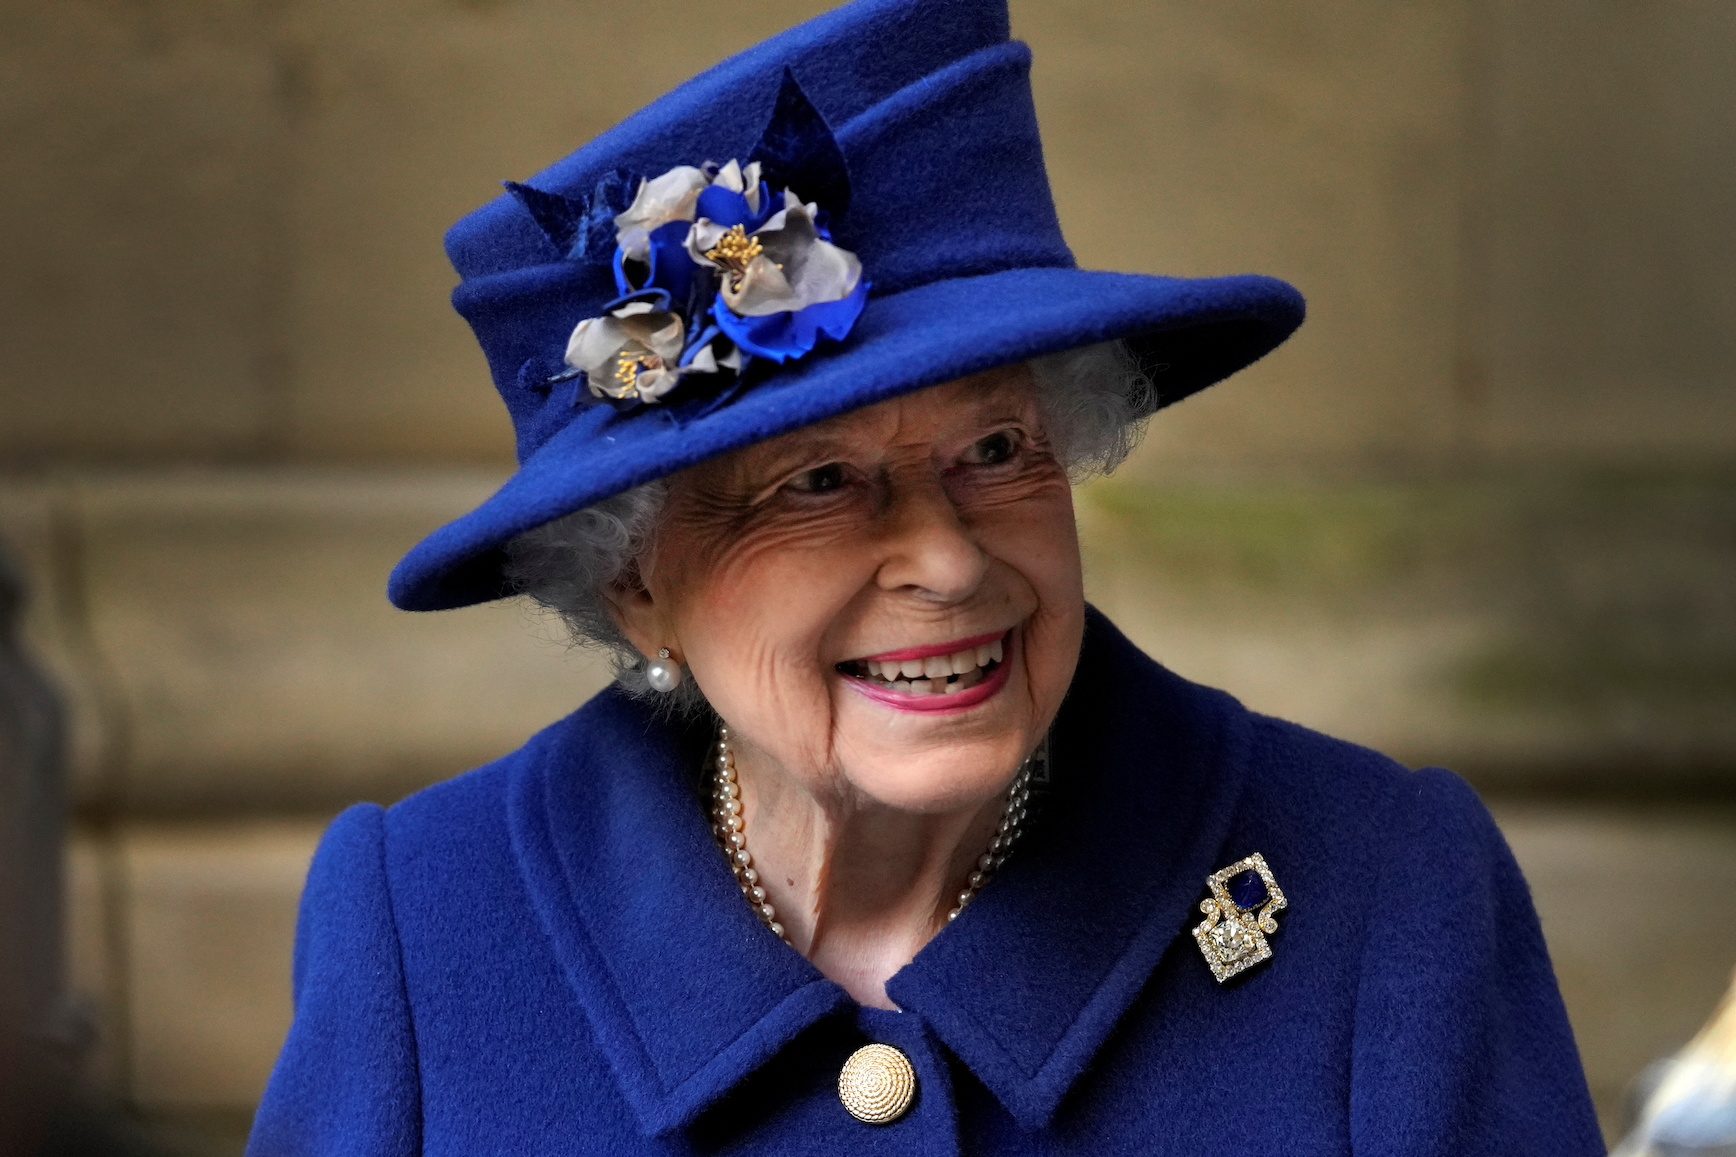 Don’t just talk – act on climate, Queen Elizabeth signals to world leaders